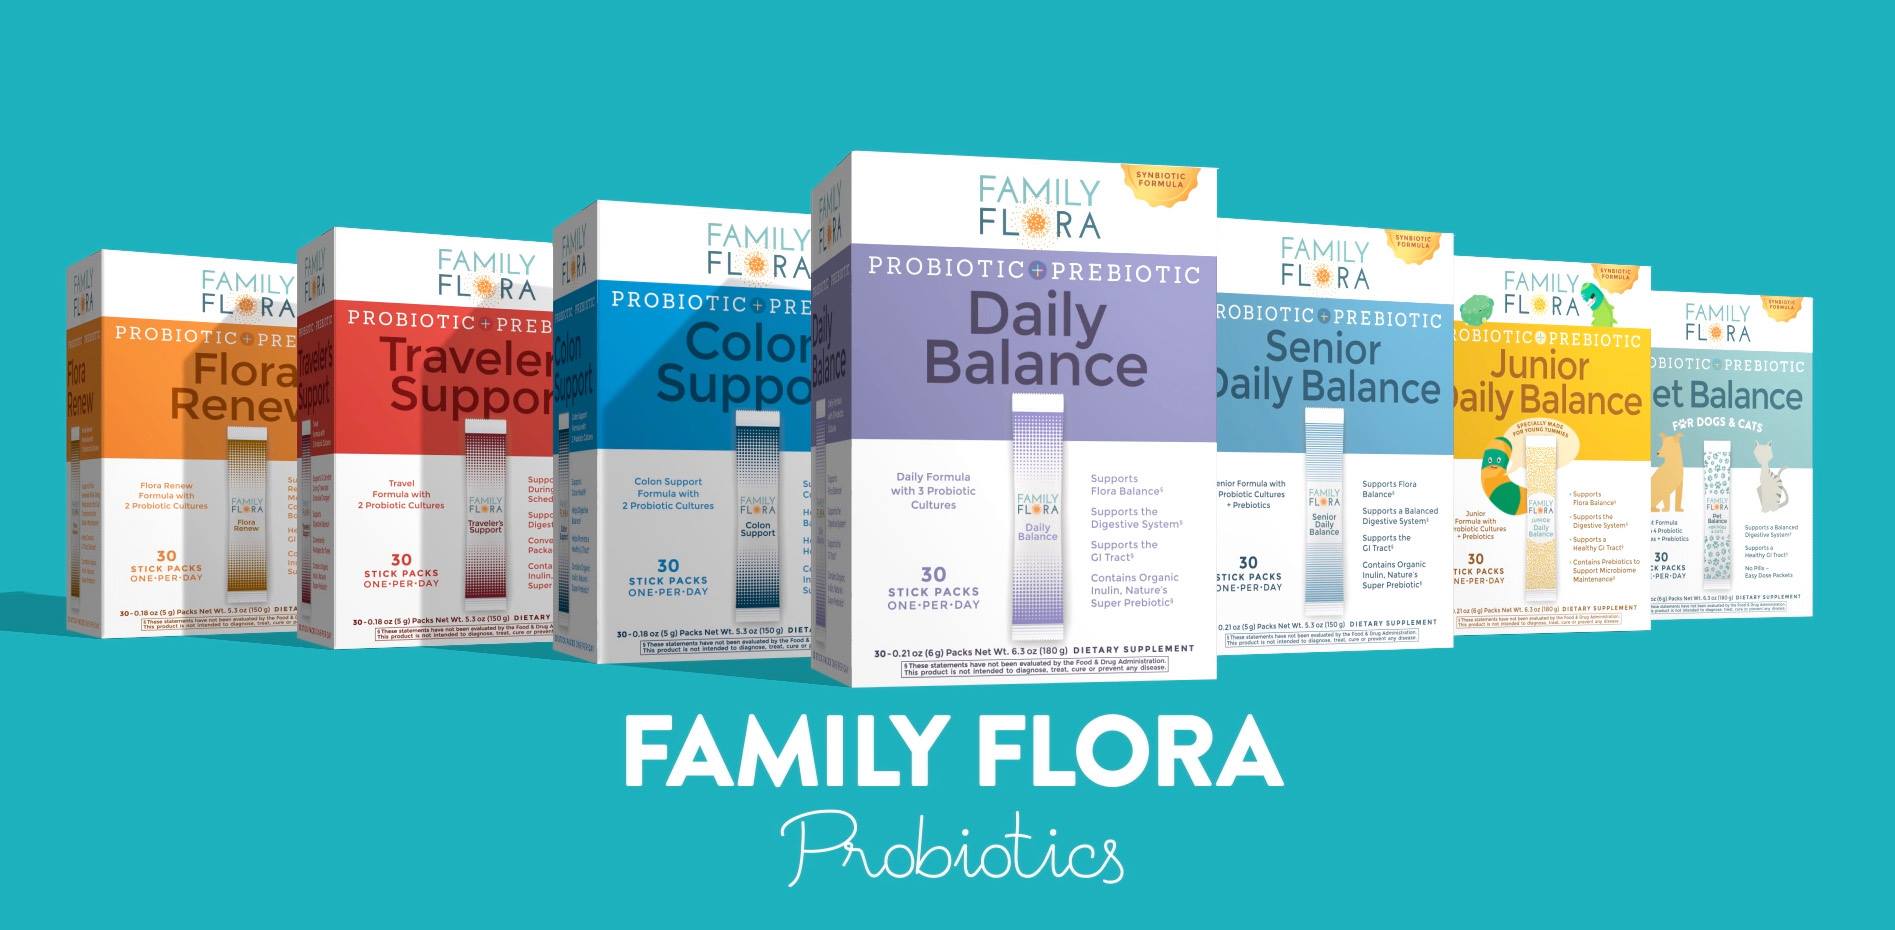 Tried It Tuesday: Family Flora Daily Balance #Giveaway